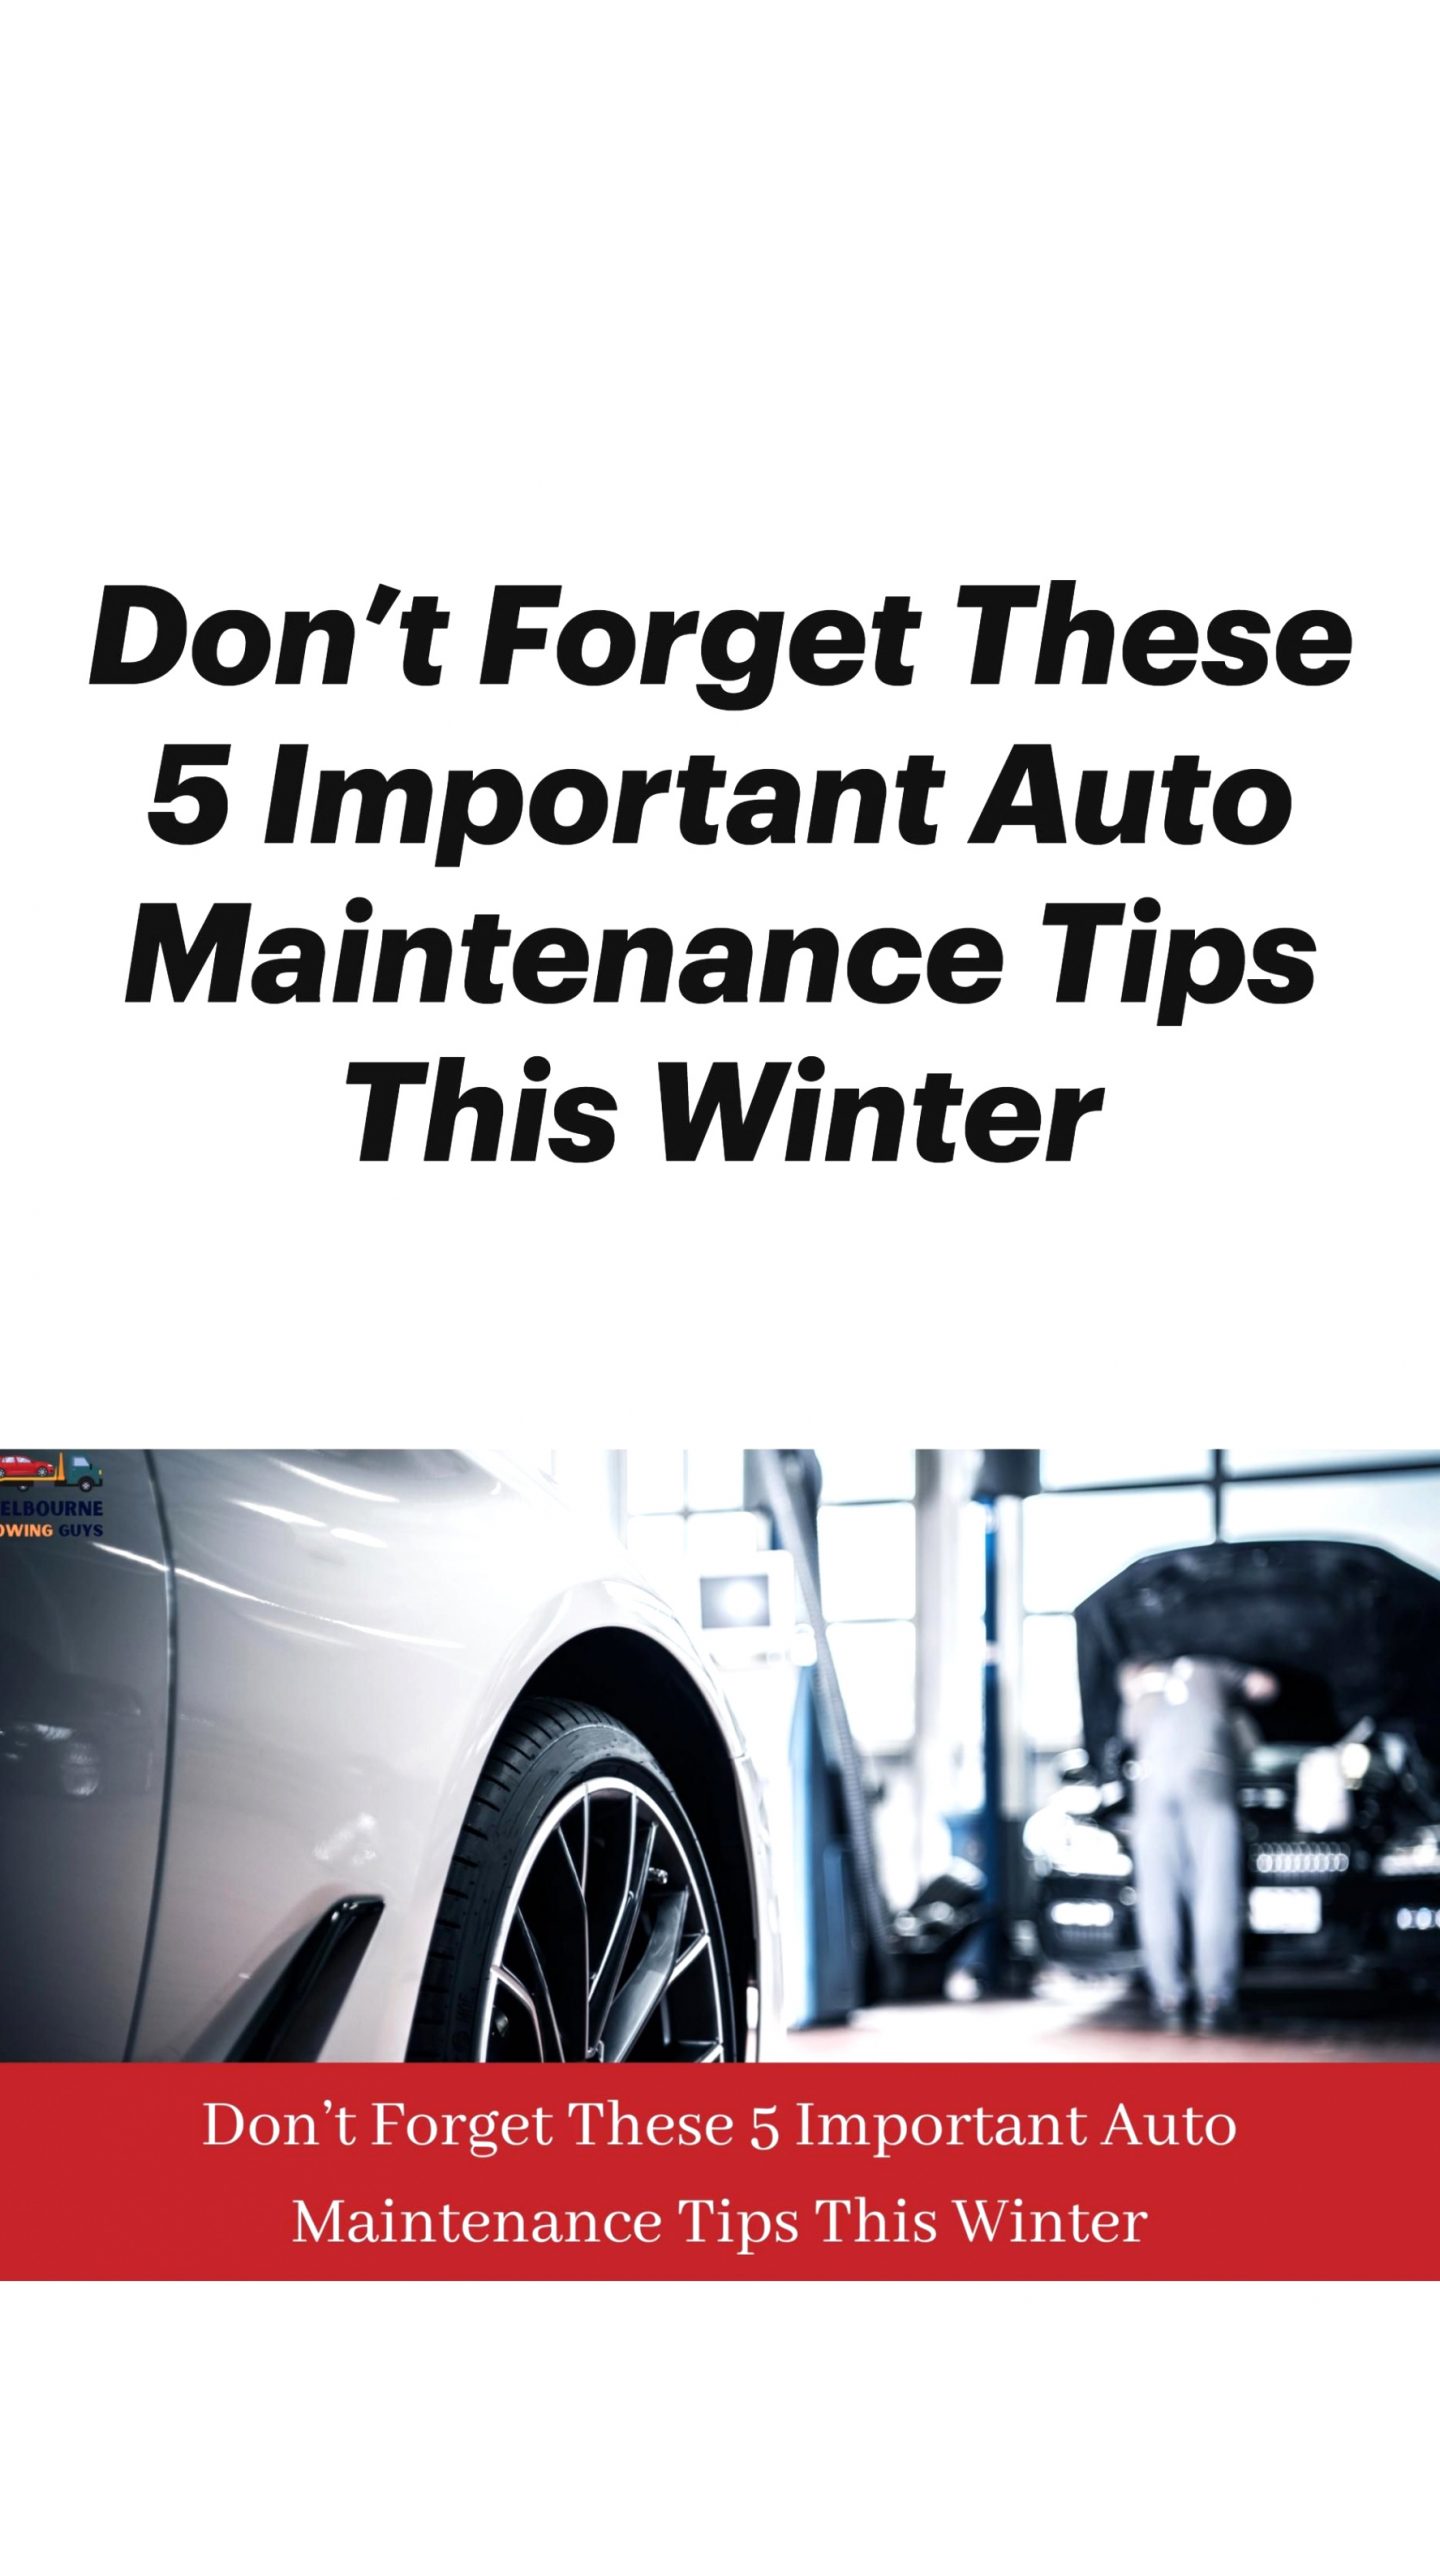 Cars and Truck Insurance Provider In Arcadia, Hancock County Dans Don’t for these 5 Important Auto Maintenance Tips This Winter